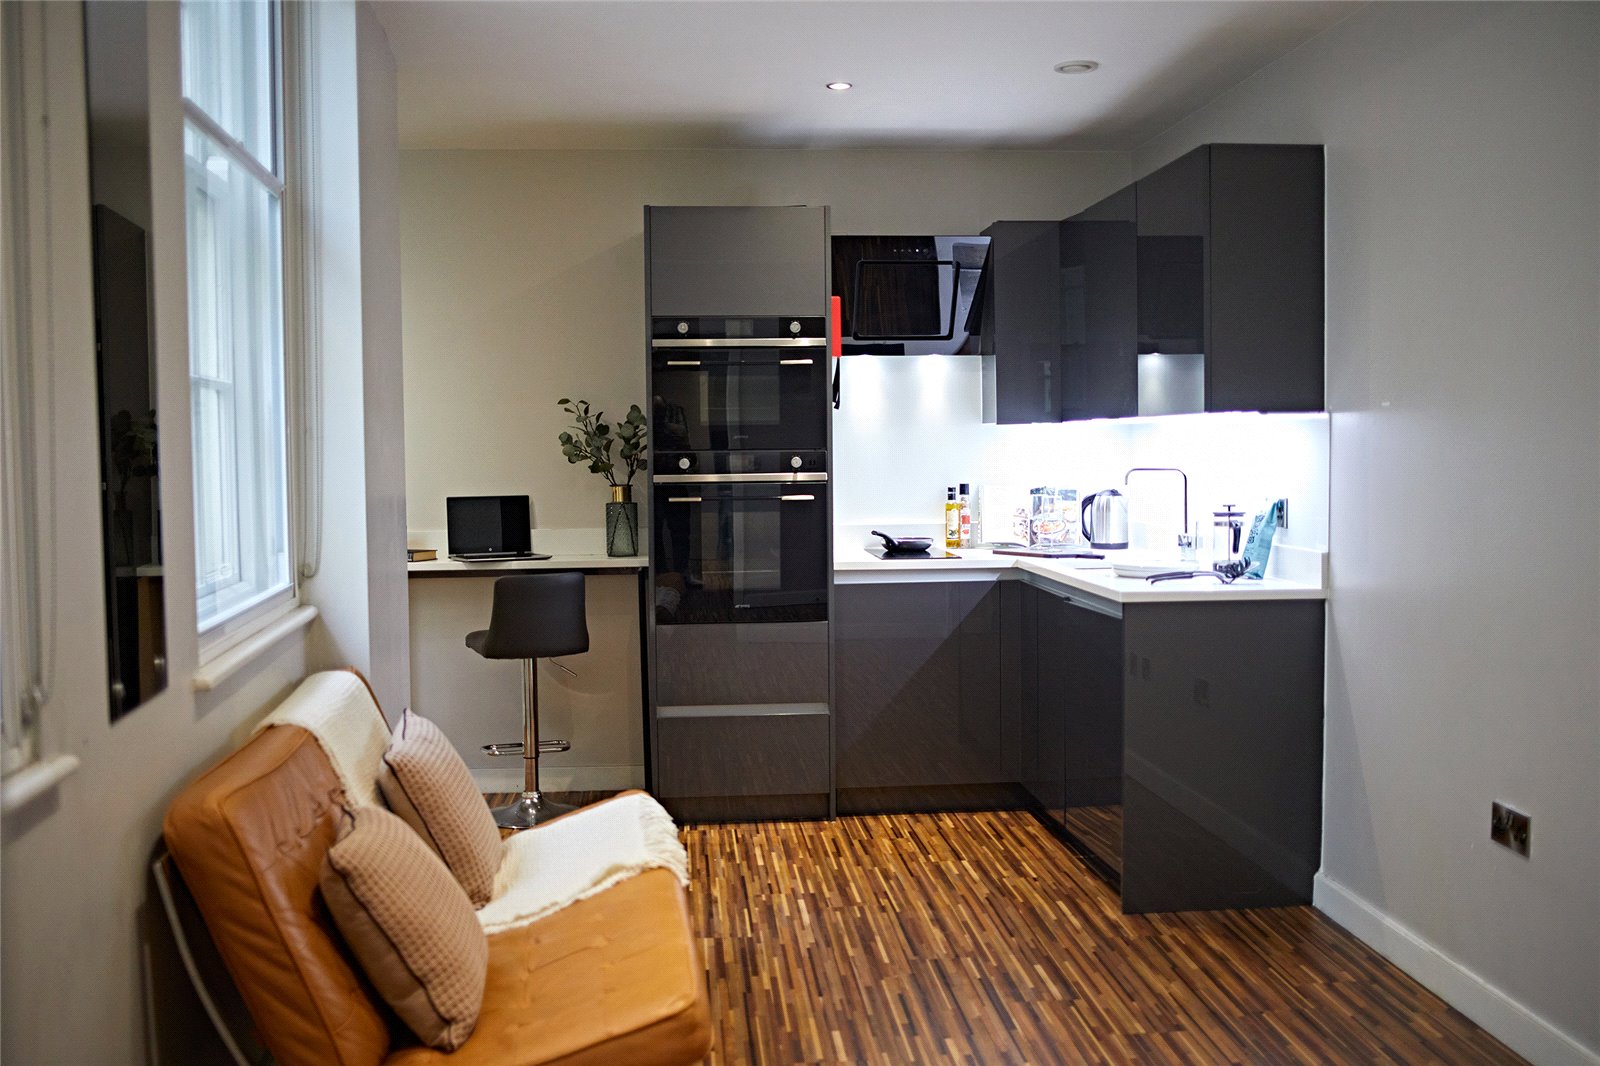 0 bed apartment for rent in Manchester. From YPP - Leeds